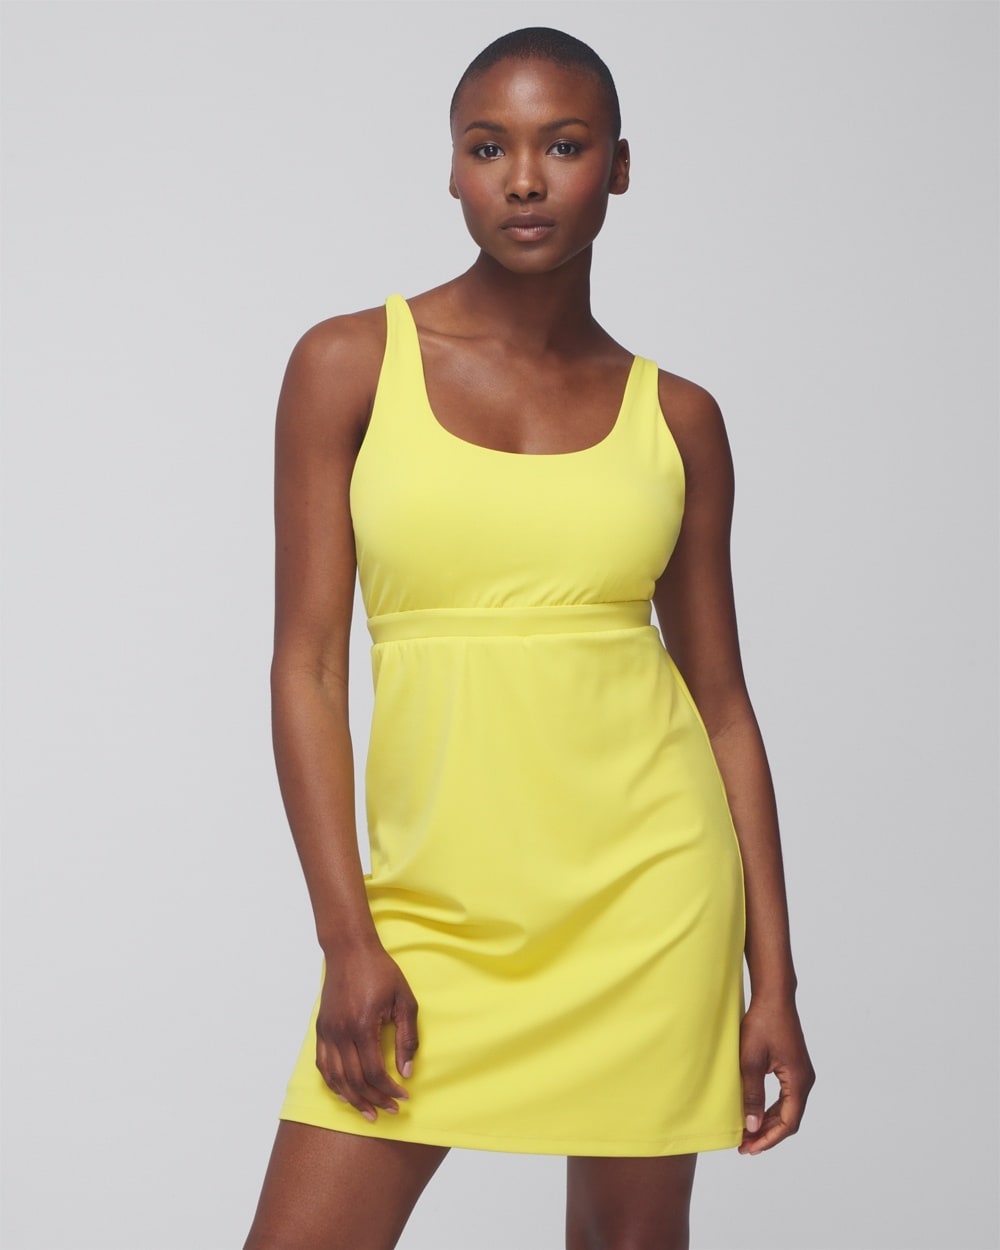 Shop Soma Women's 24/7 Strappy Back Sport Dress In Yellow Size Medium |